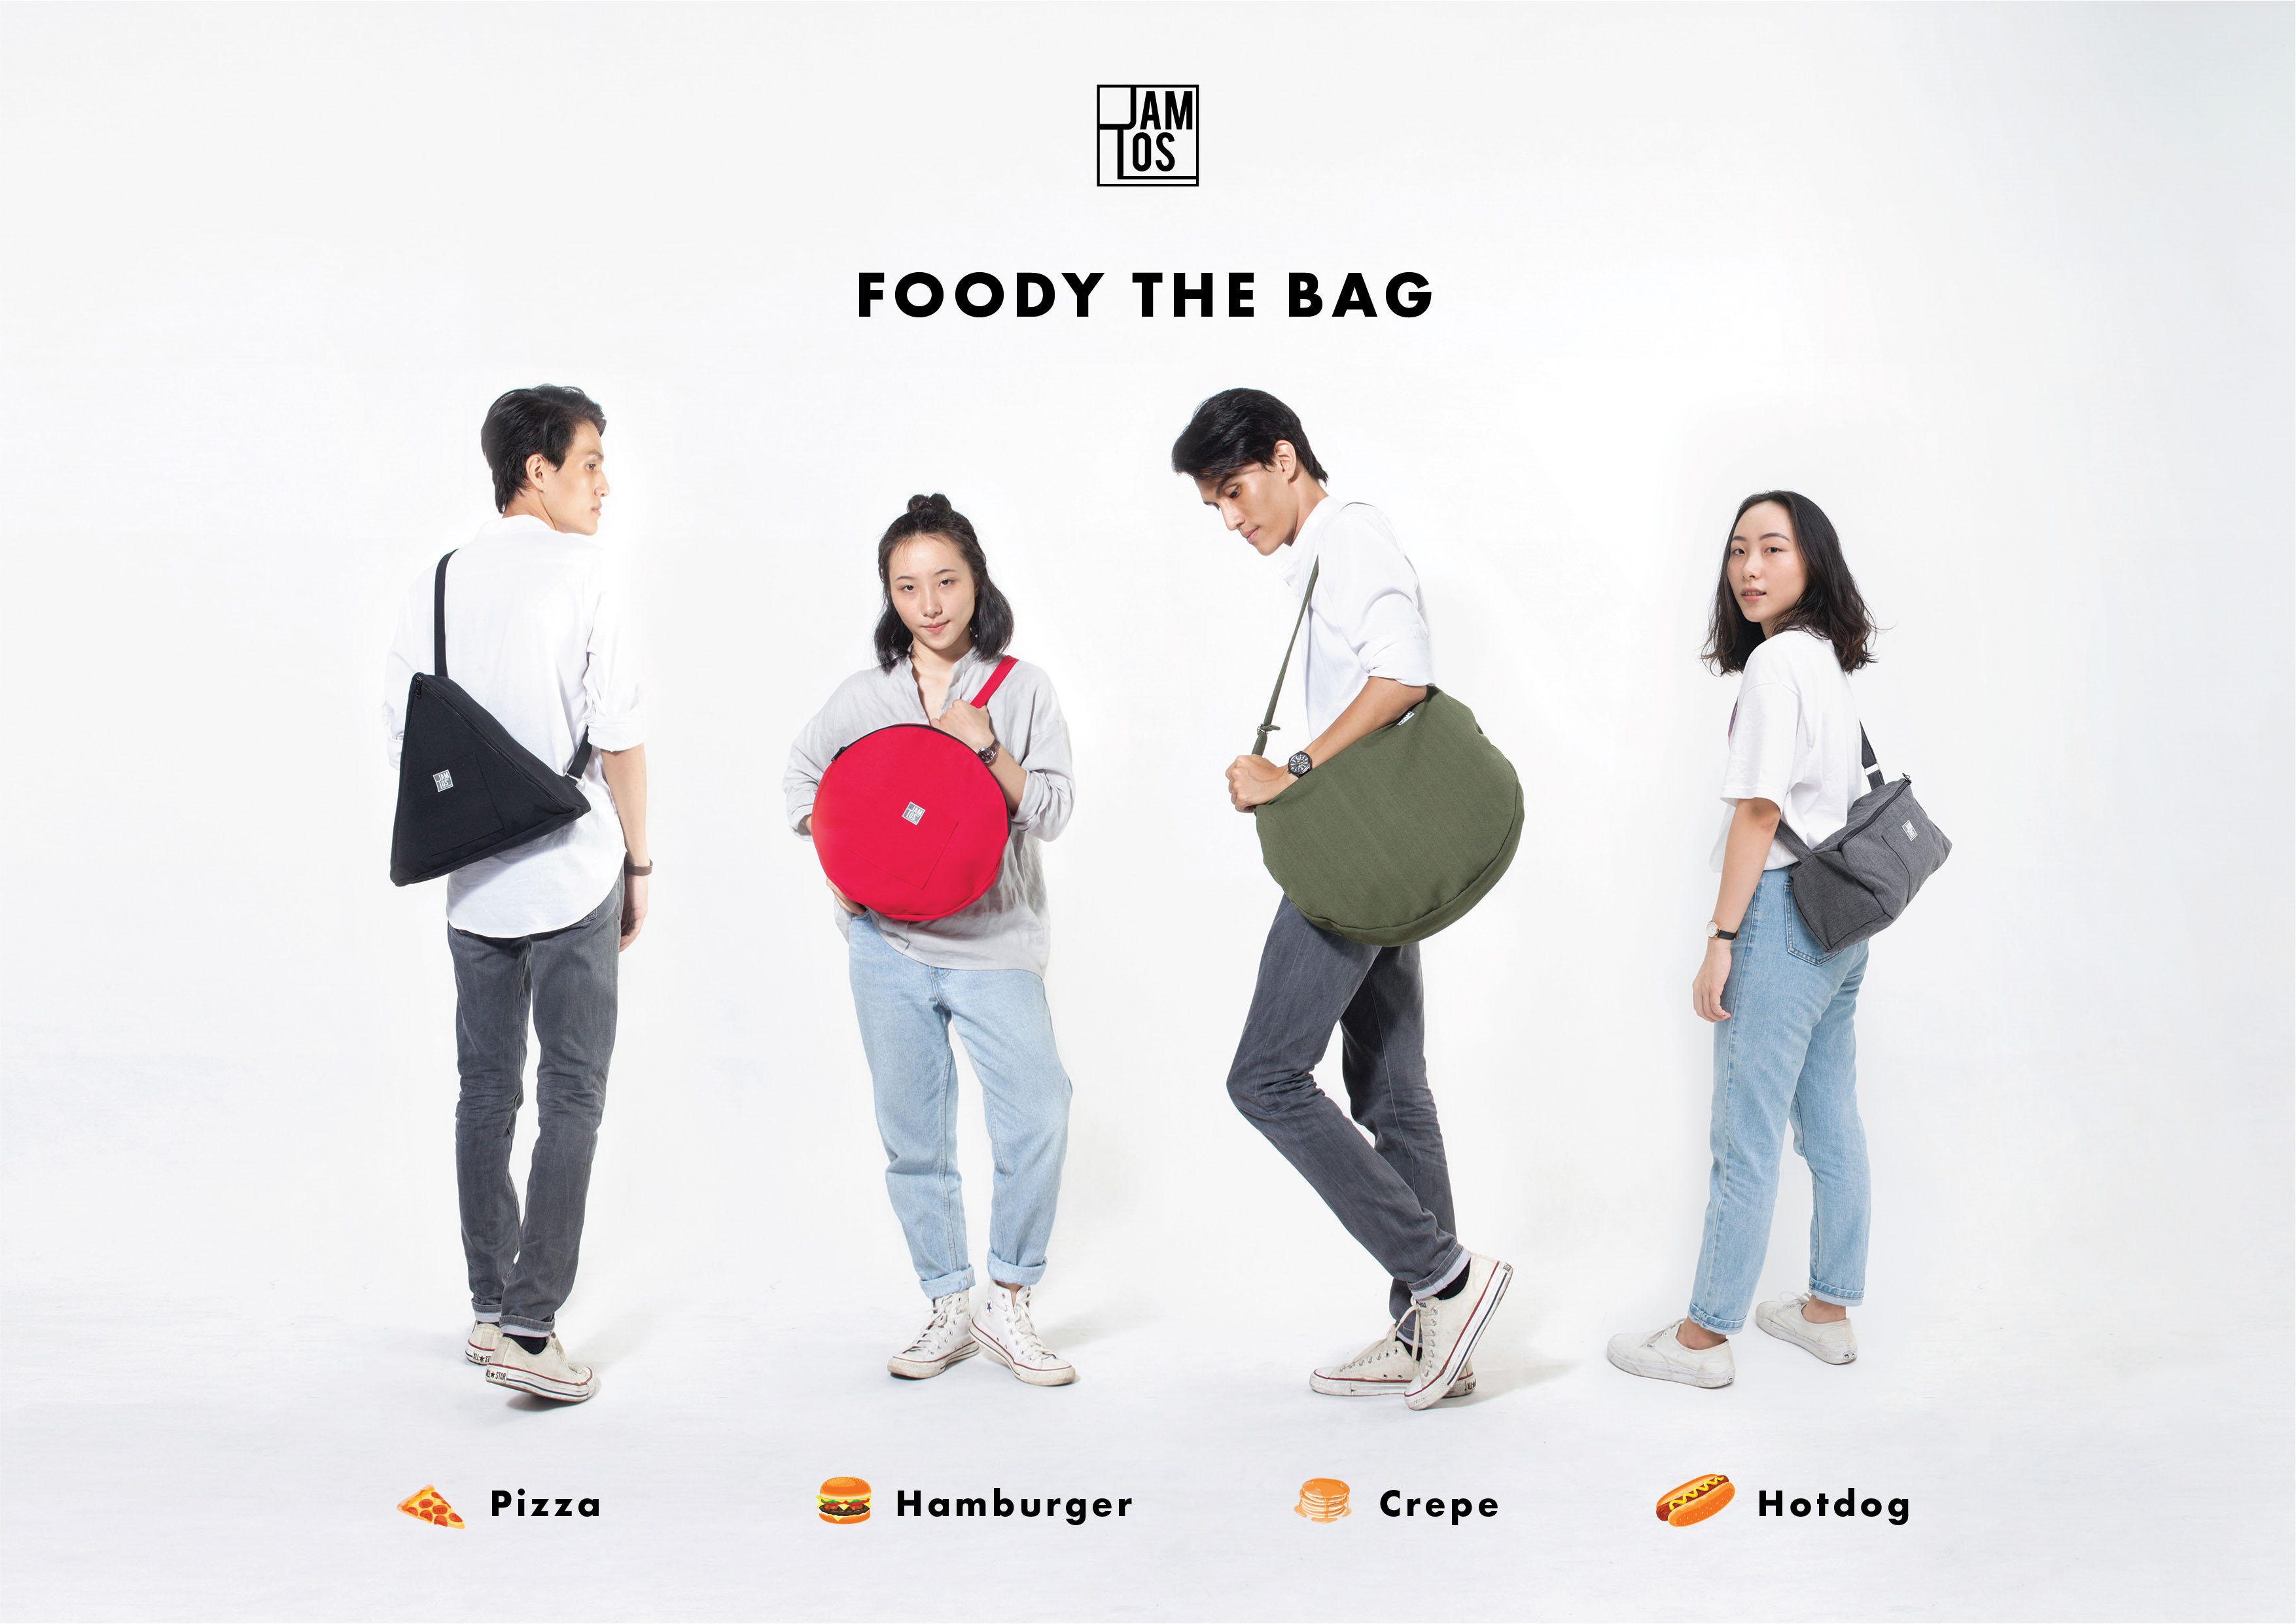 Jamlos’ FoodyTheBag collection with bags inspired by hotdogs, pizzas, hamburgers and crepes tells the love of baked goods and food.